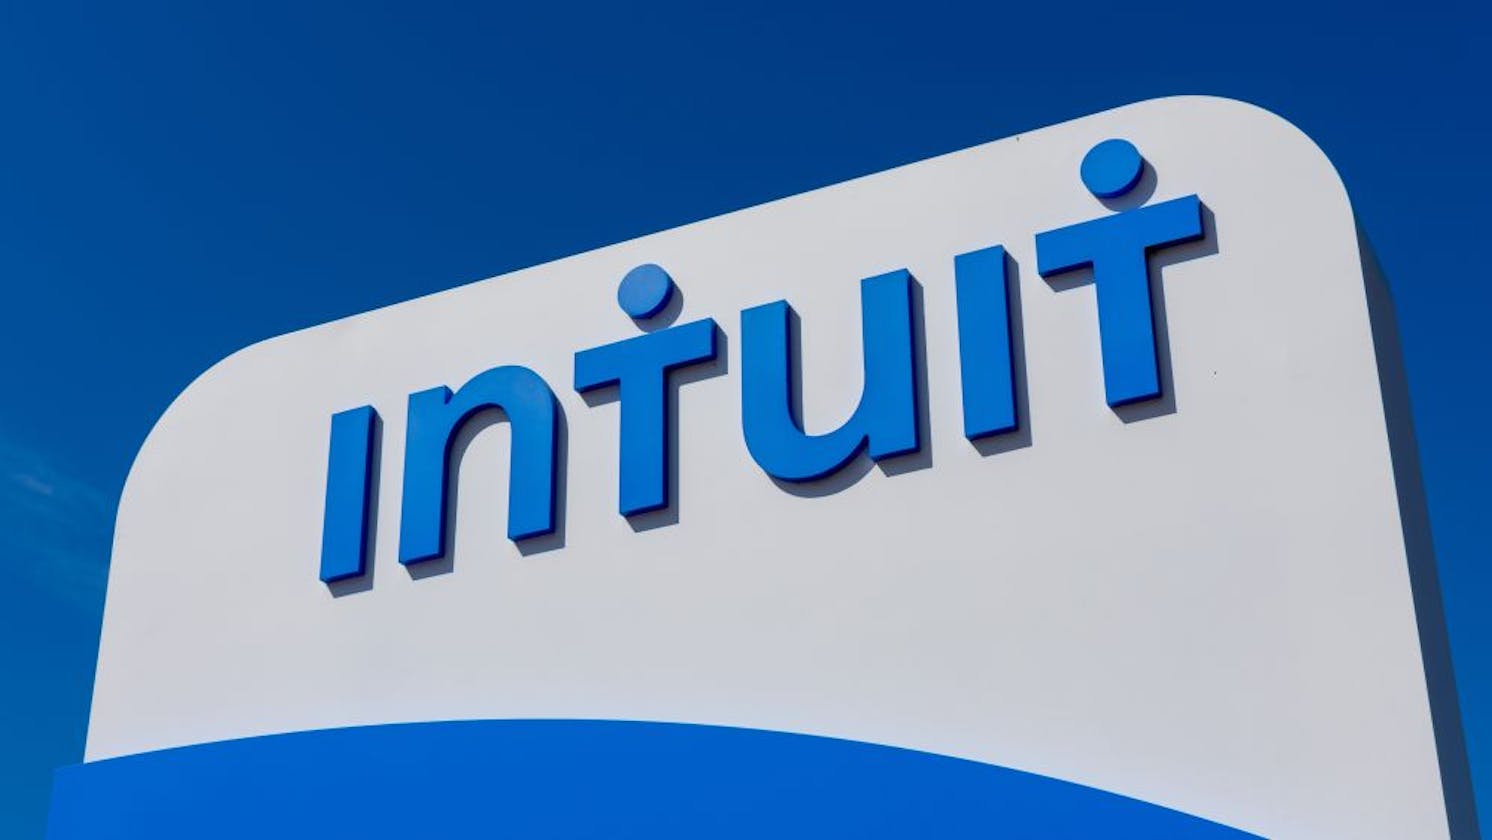 Frontend Interview Experience at Intuit